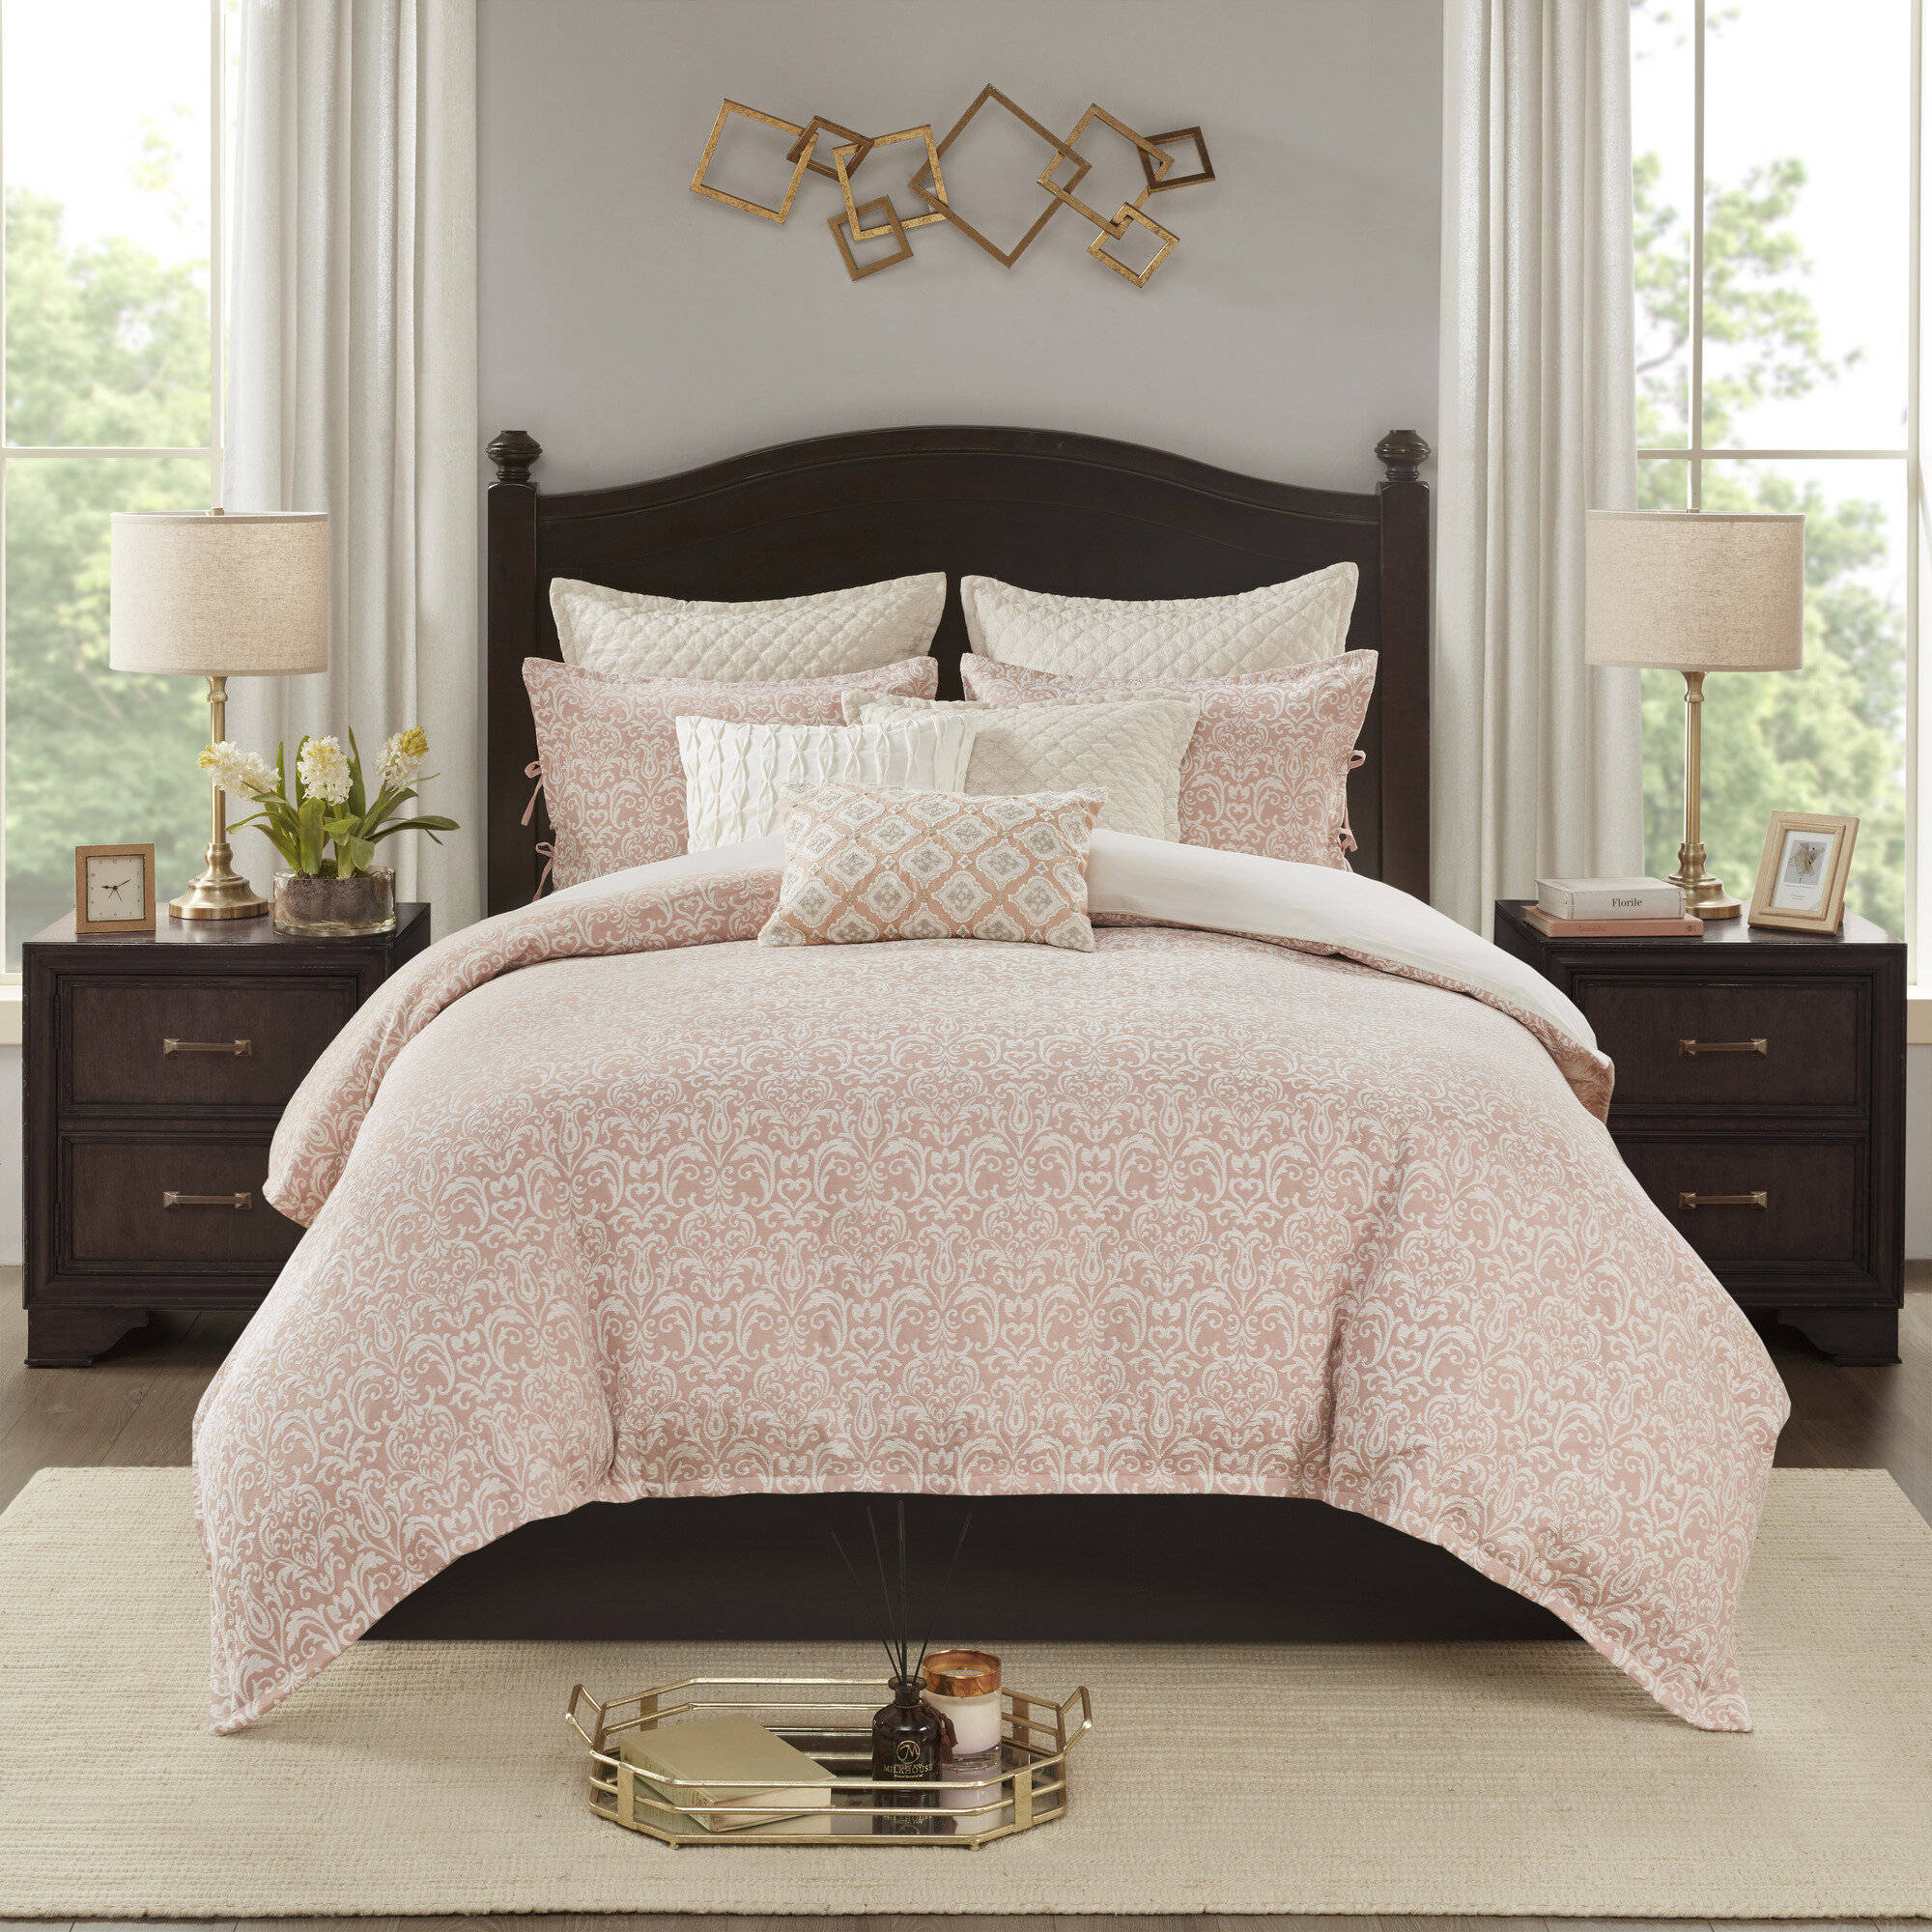 Laura Ashley - Queen Comforter Set, Luxury Bedding with Matching Shams,  Stylish Home Decor for All Seasons (Wisteria Pink, Queen)